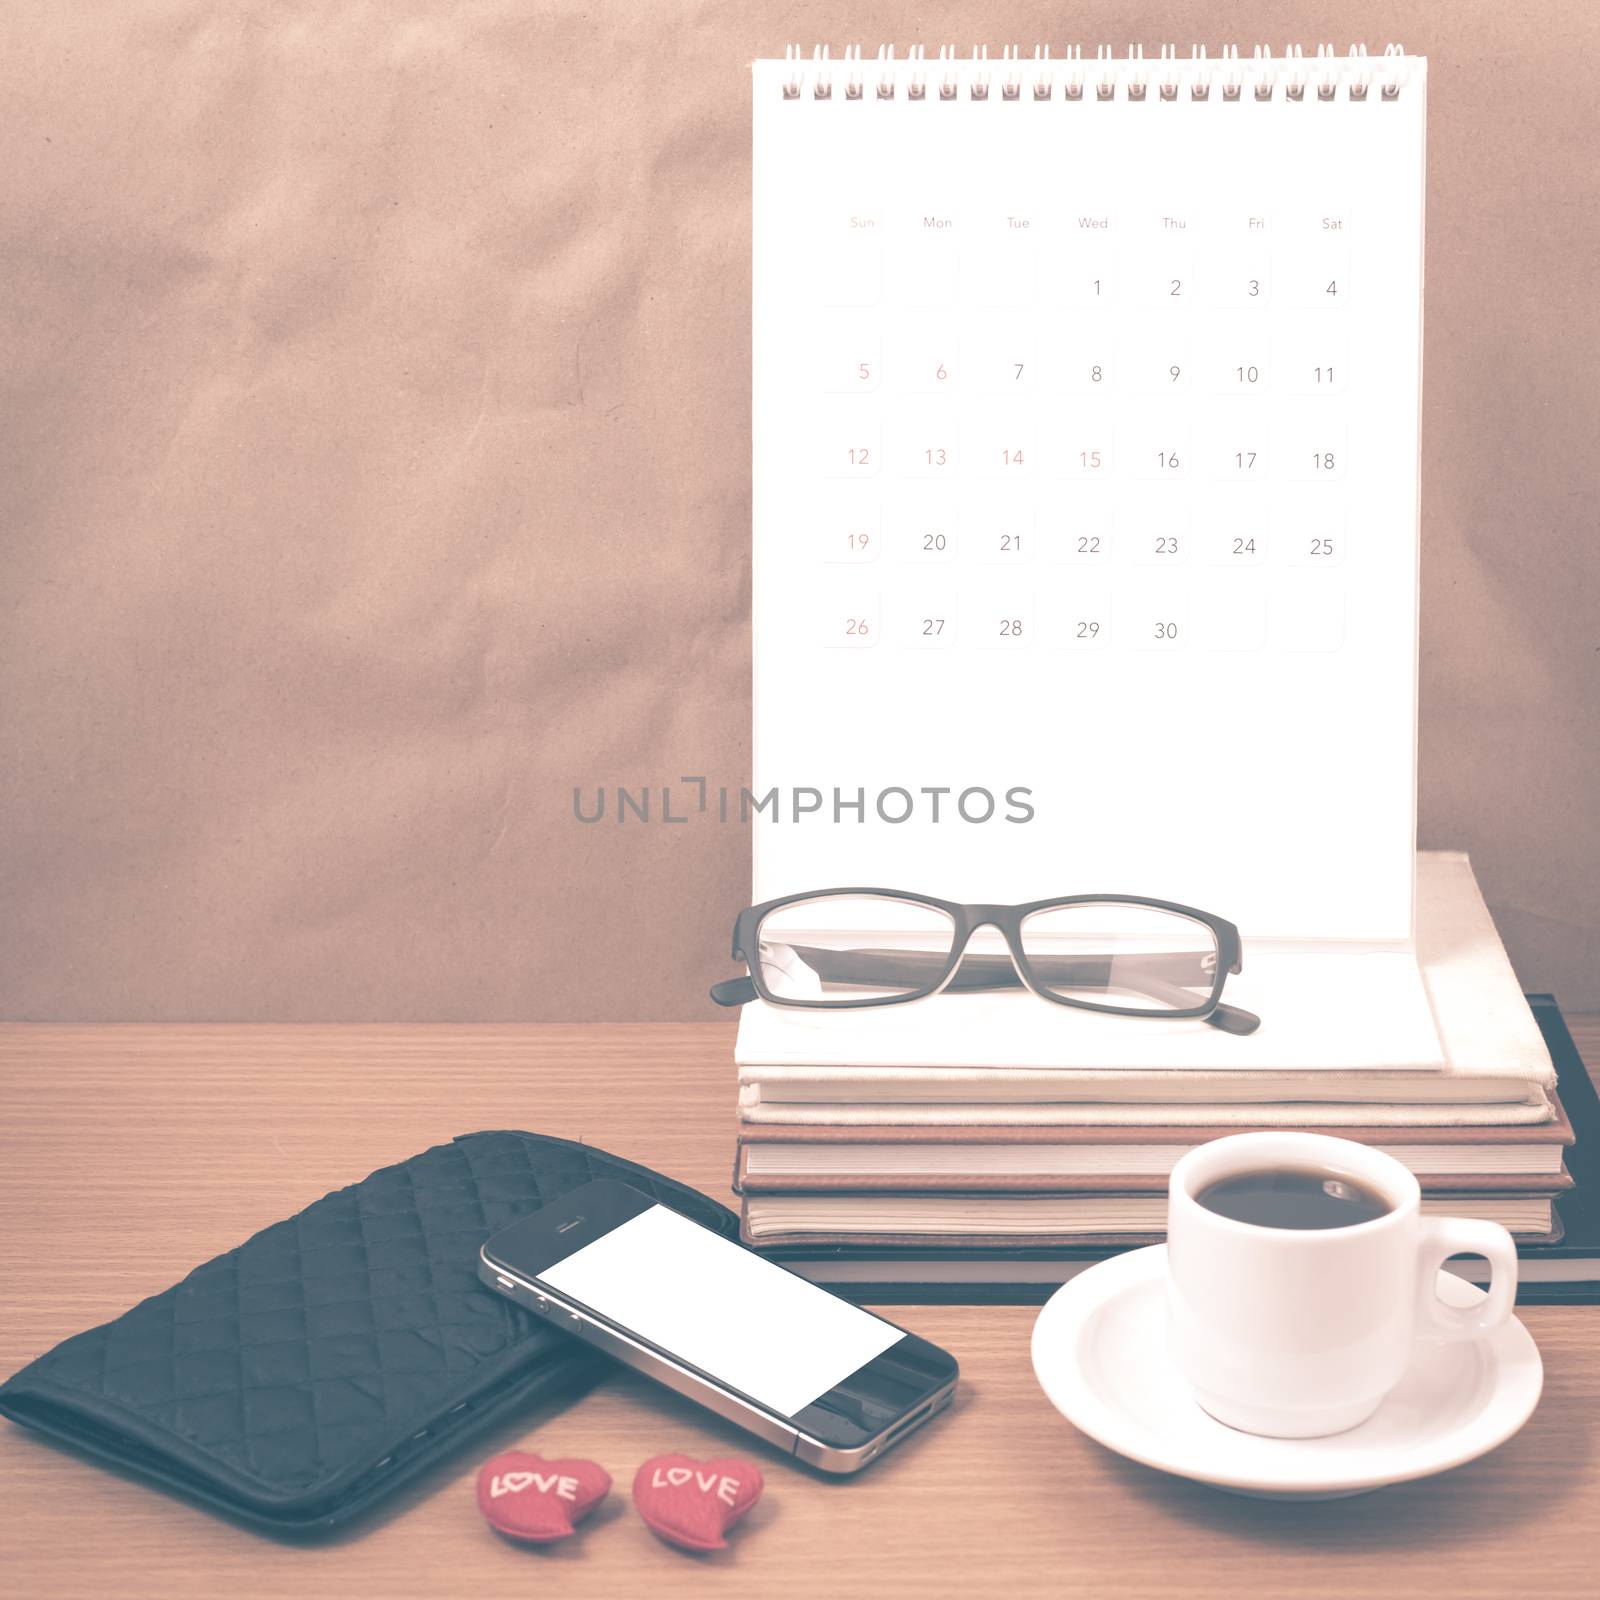 office desk : coffee with phone,wallet,calendar,heart,stack of book,eyeglasses on wood background vintage style